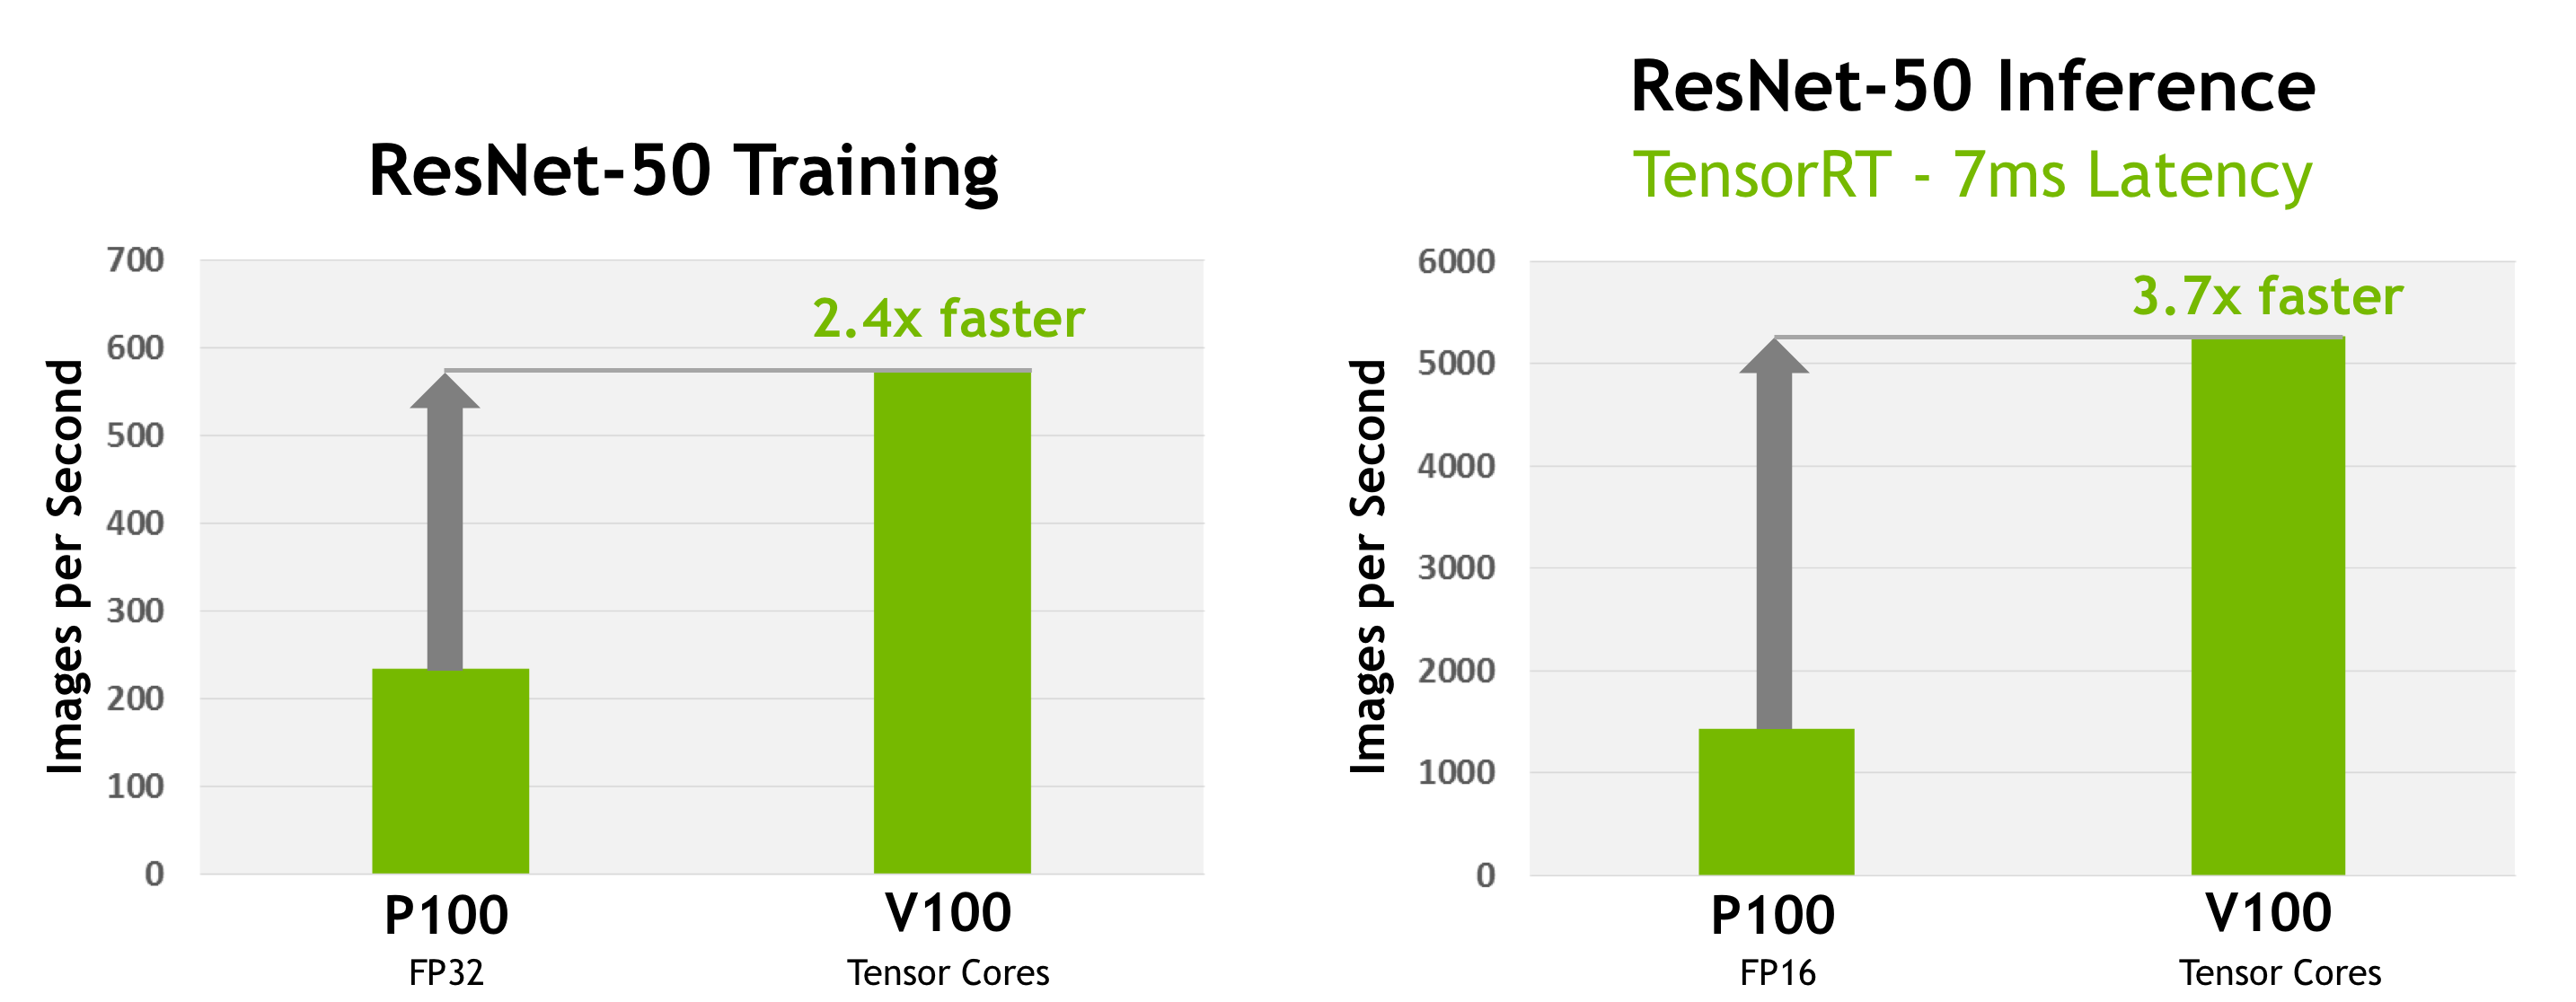 Figure 2: Left: Tesla V100 trains the ResNet-50 deep neural network 2.4x faster than Tesla P100. Right: Given a target latency per image of 7ms, Tesla V100 is able to perform inference using the ResNet-50 deep neural network 3.7x faster than Tesla P100. (Measured on pre-production Tesla V100.)